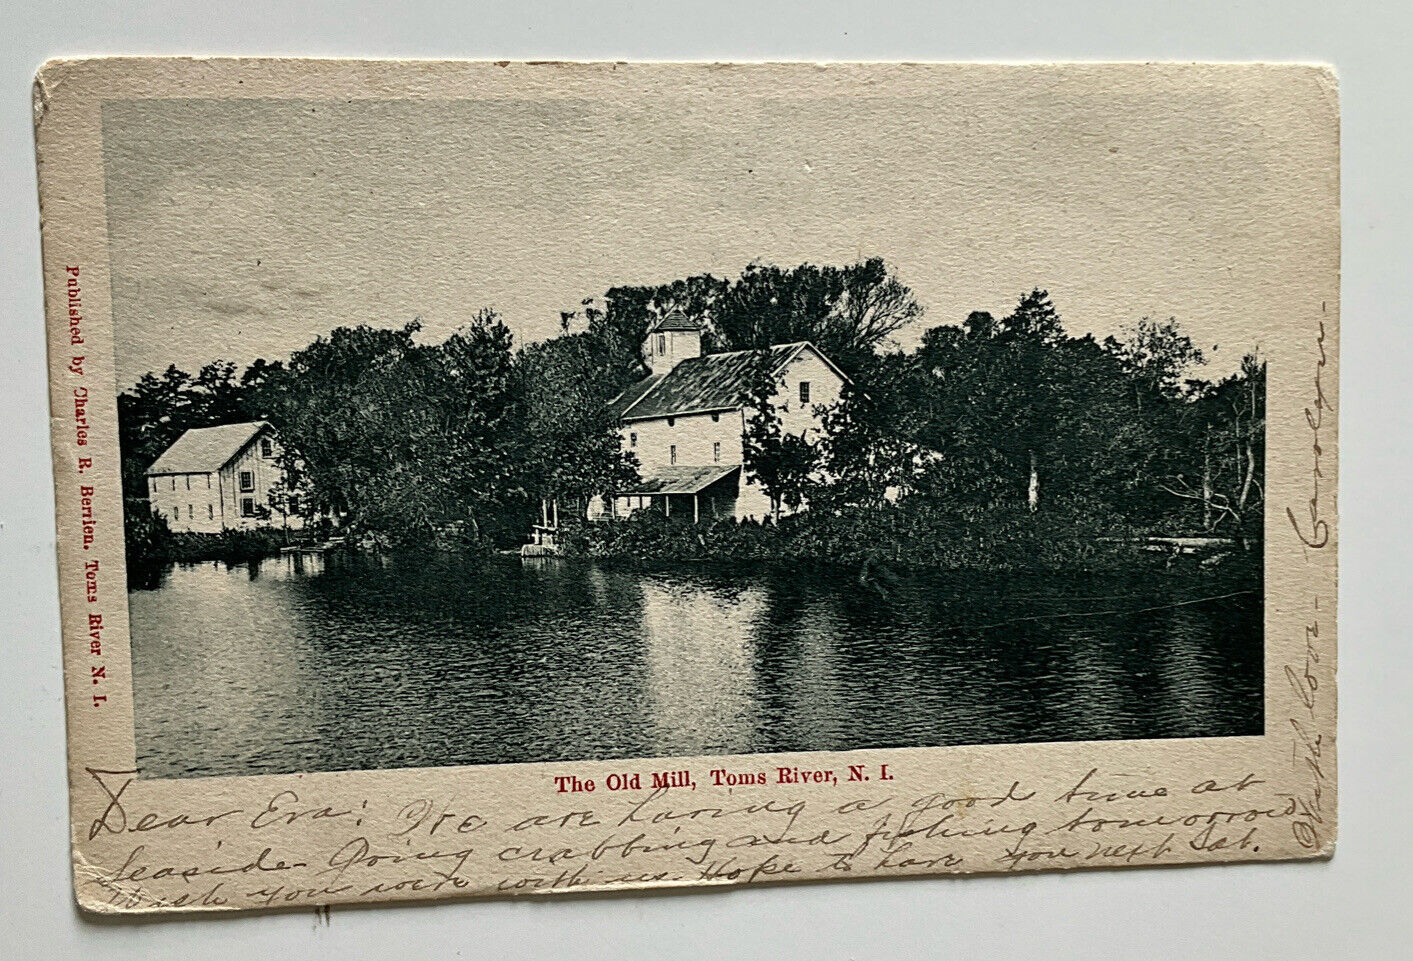 TOMS River, The Old Mill.1905